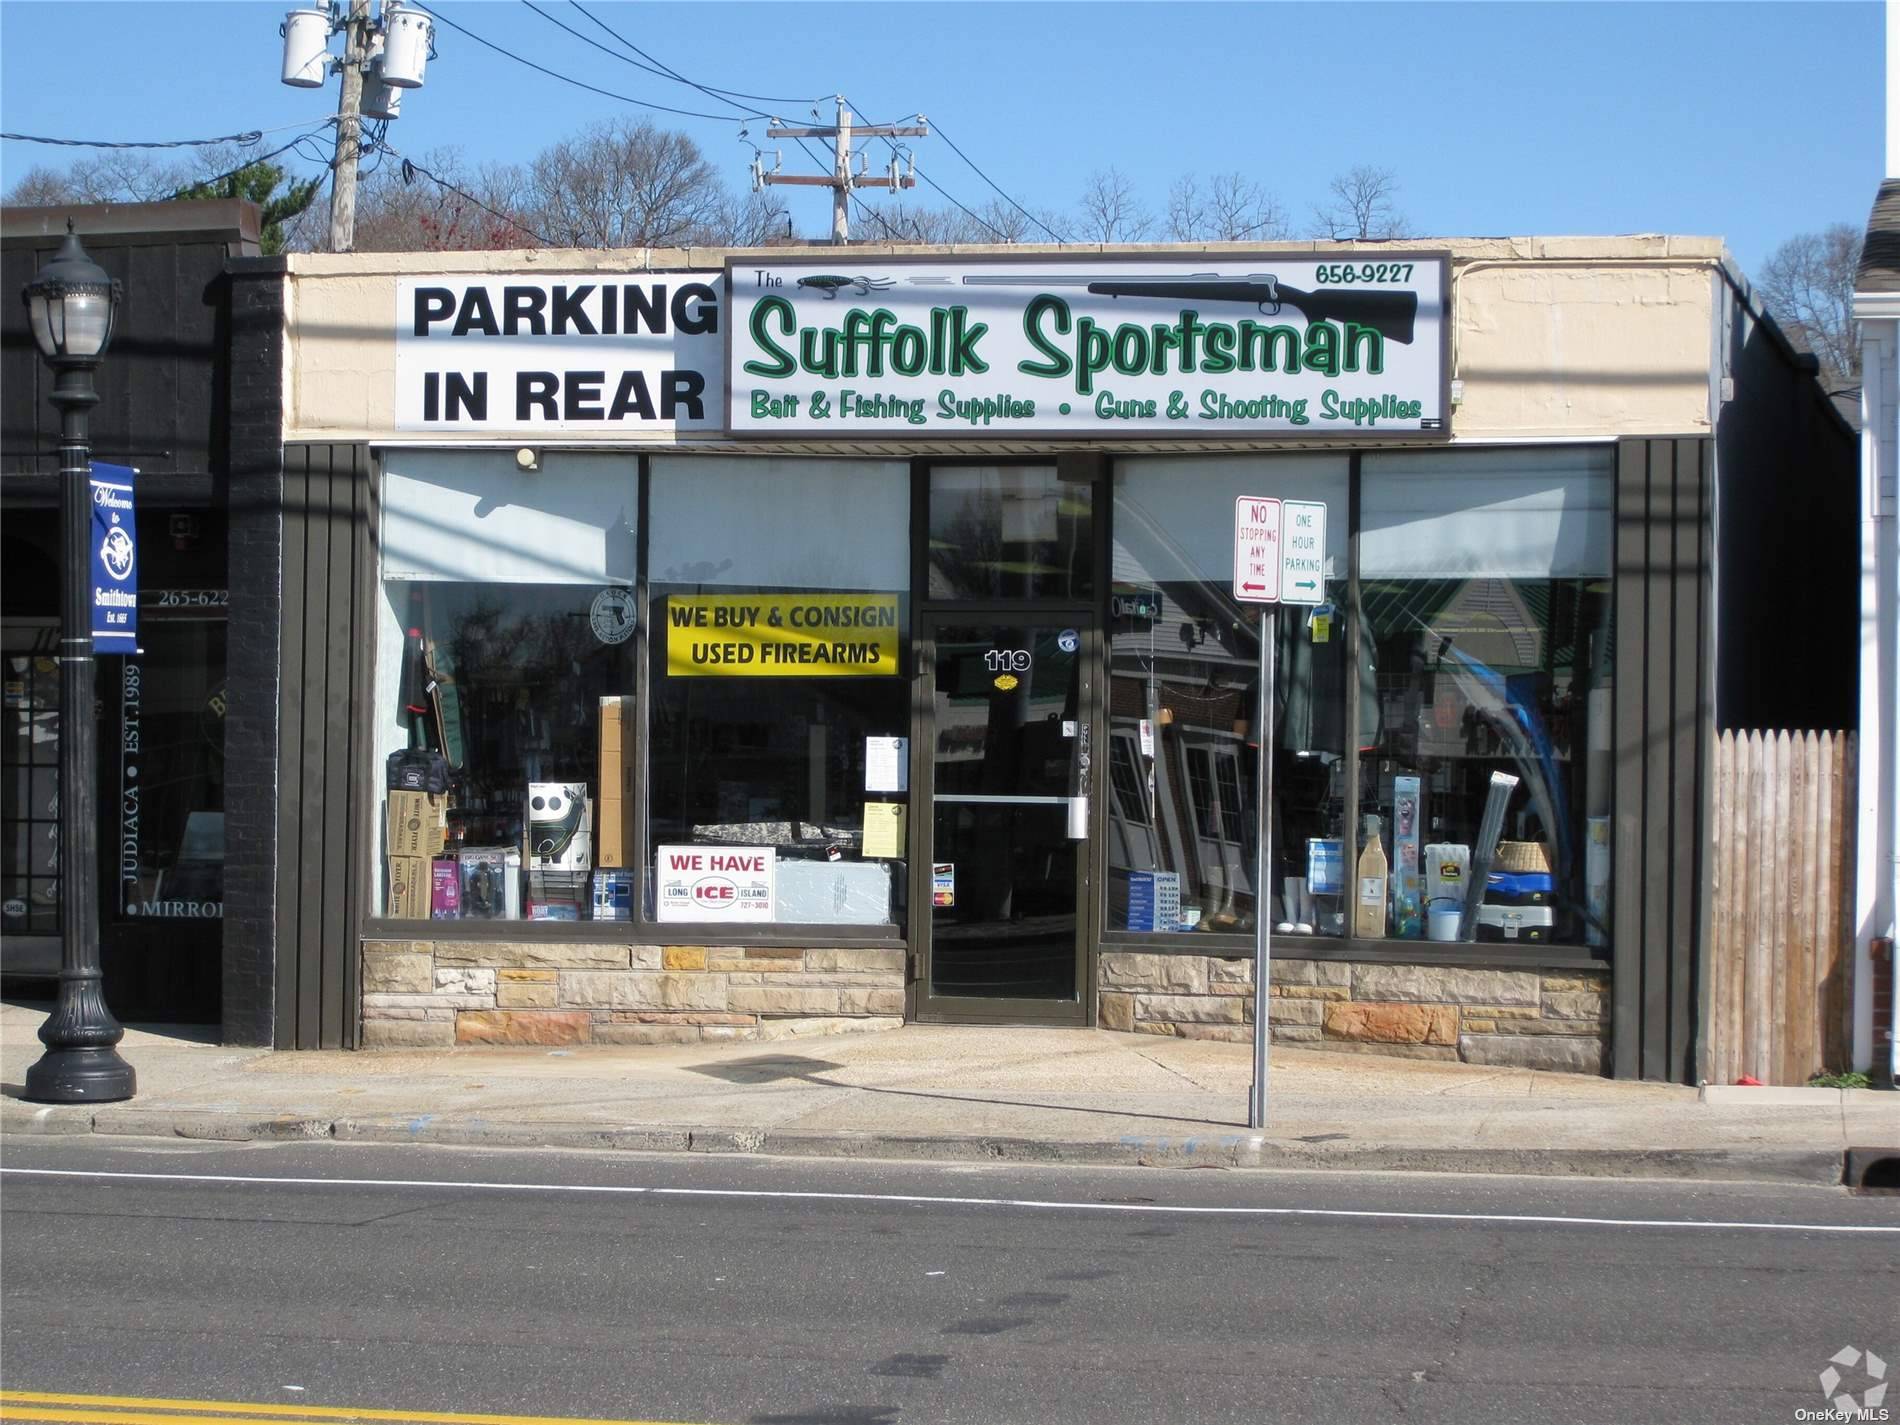 Priime, Storefront Property by a traffic lite is now for sale on a busy Main Street area of Smithtown, New York.